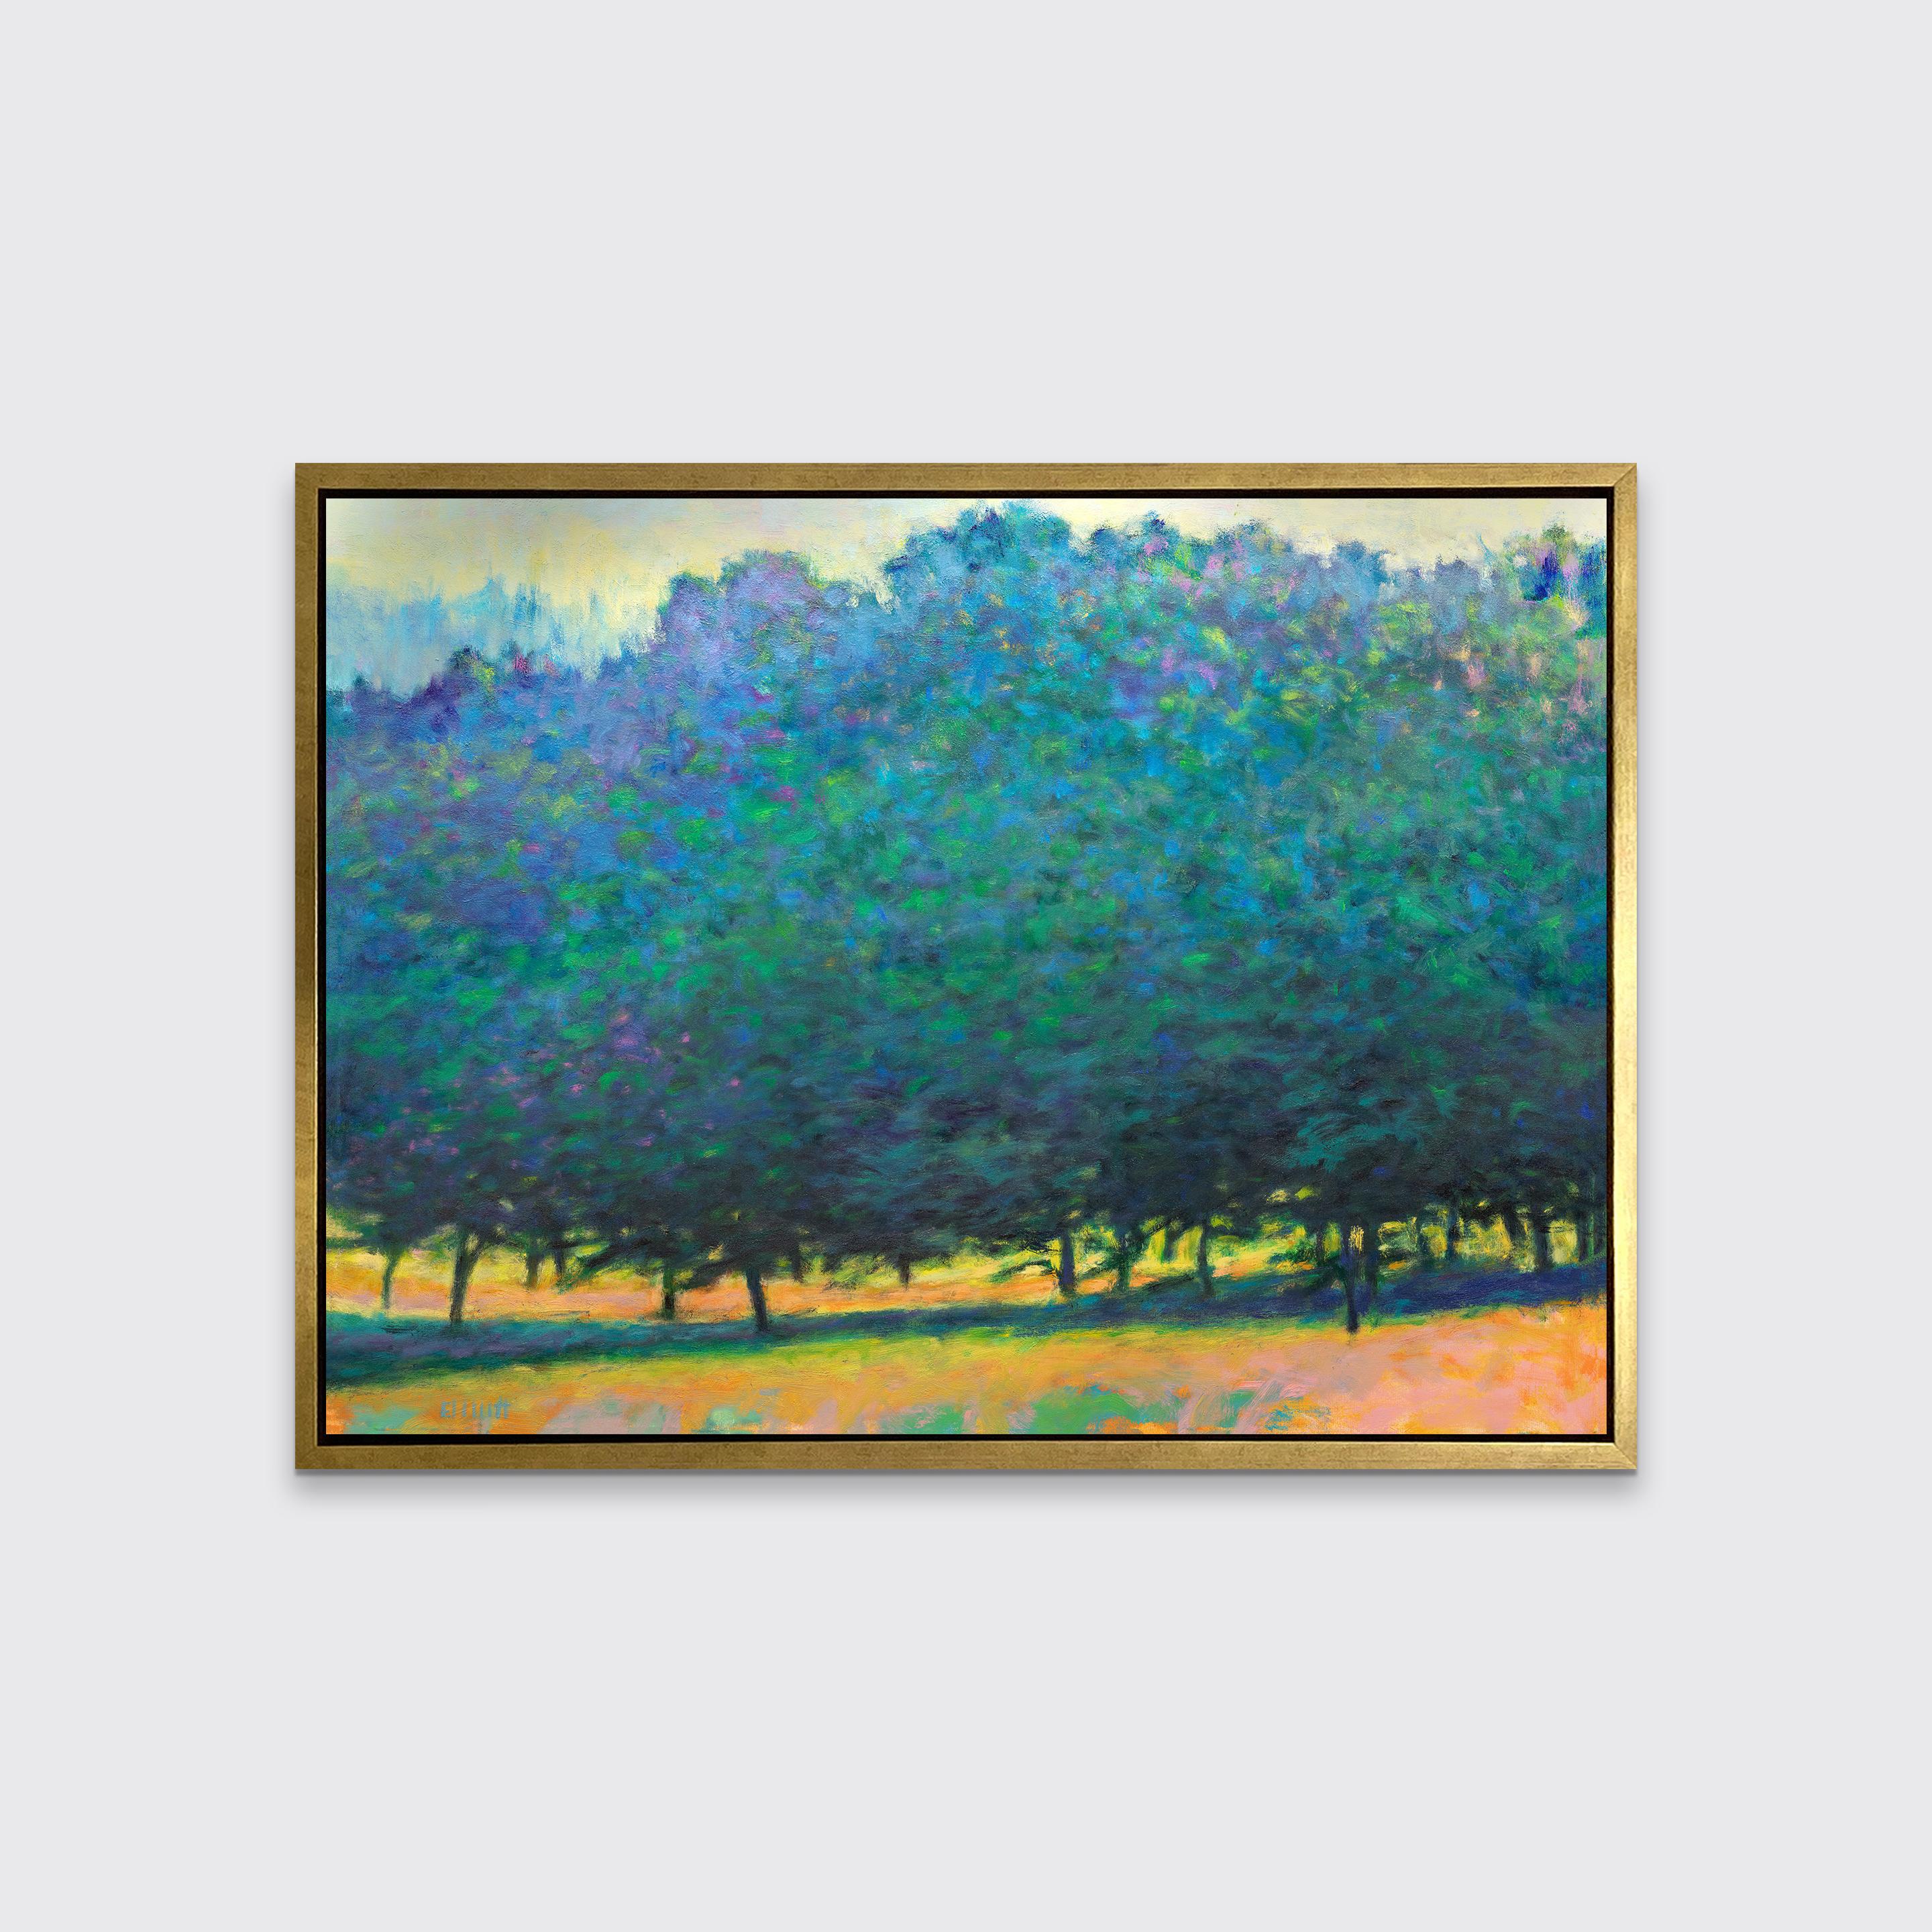 This contemporary abstract landscape limited edition print by Ken Elliott features tall, lush trees, the leaves of which are cool blue and violet tones. Small portions of the bottoms of the trunks are just visible beneath the dense forest leaves,